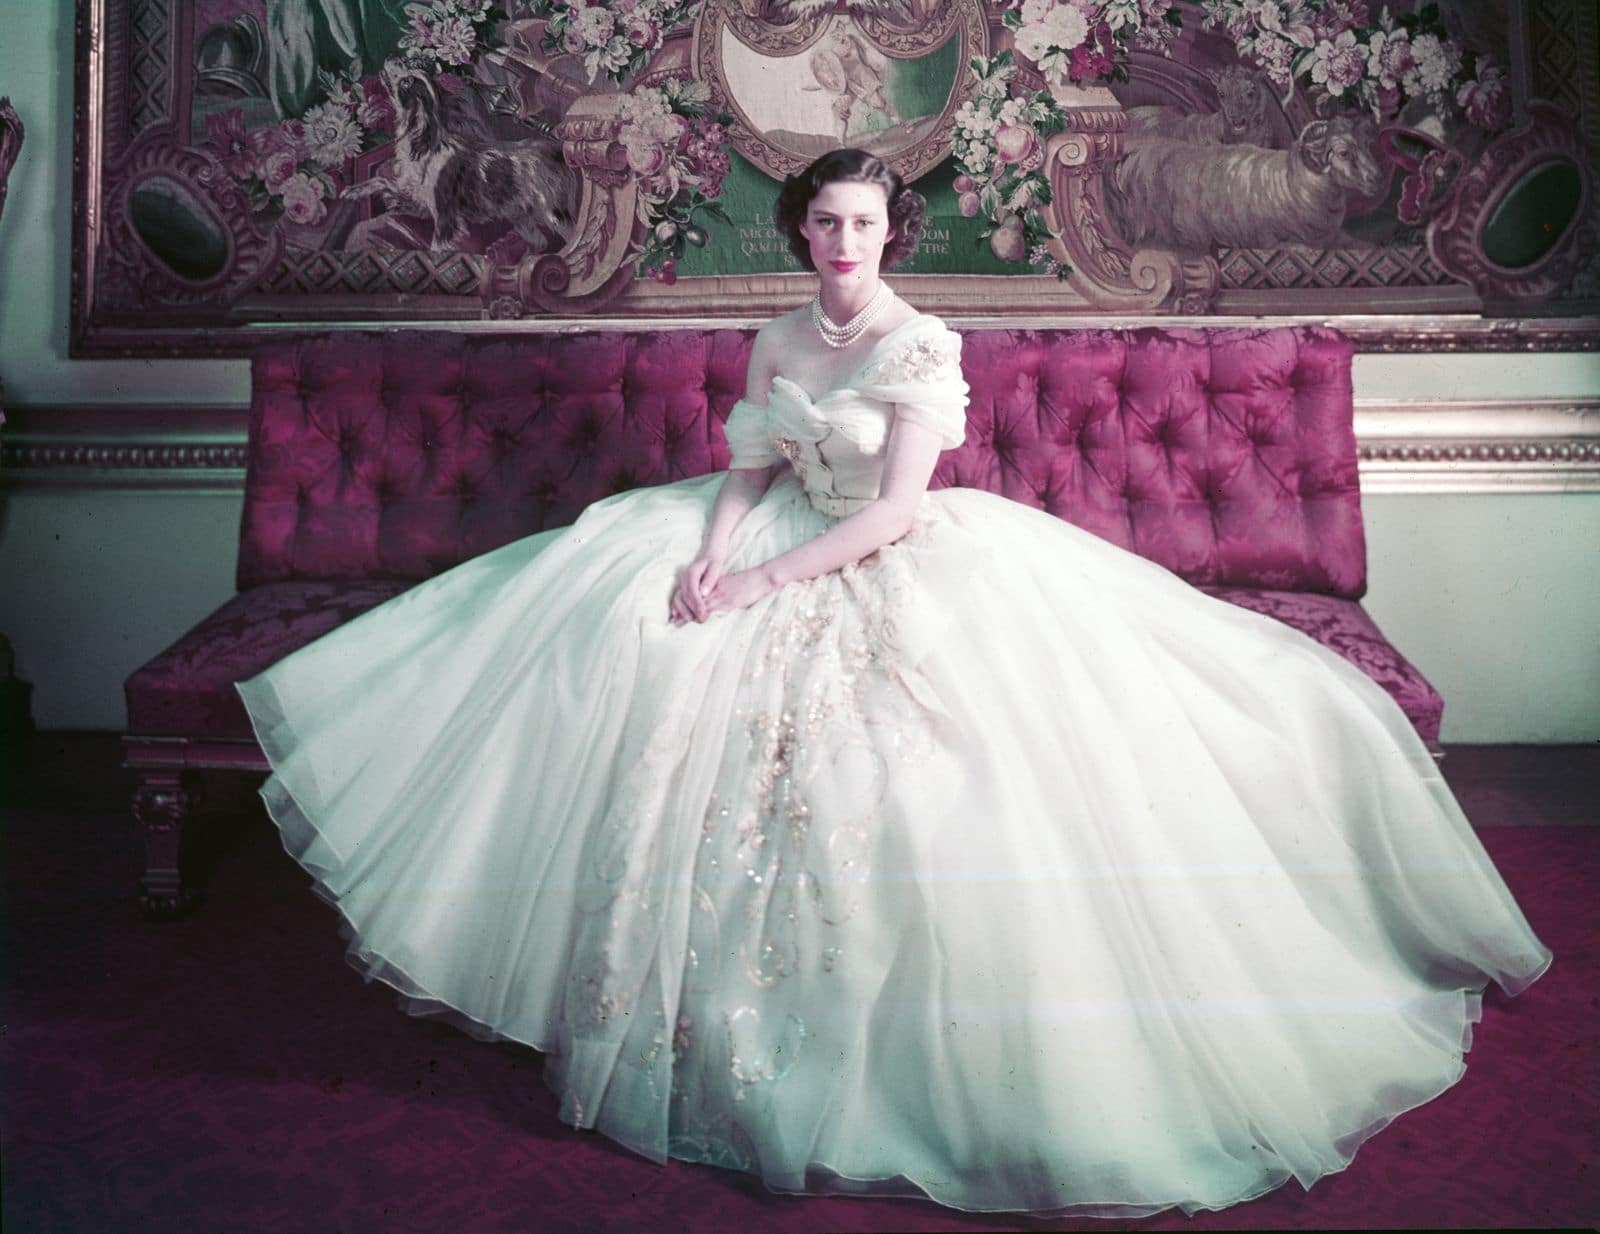 Christian Dior: Designer of Dreams is now showing at the V&A Museum in London